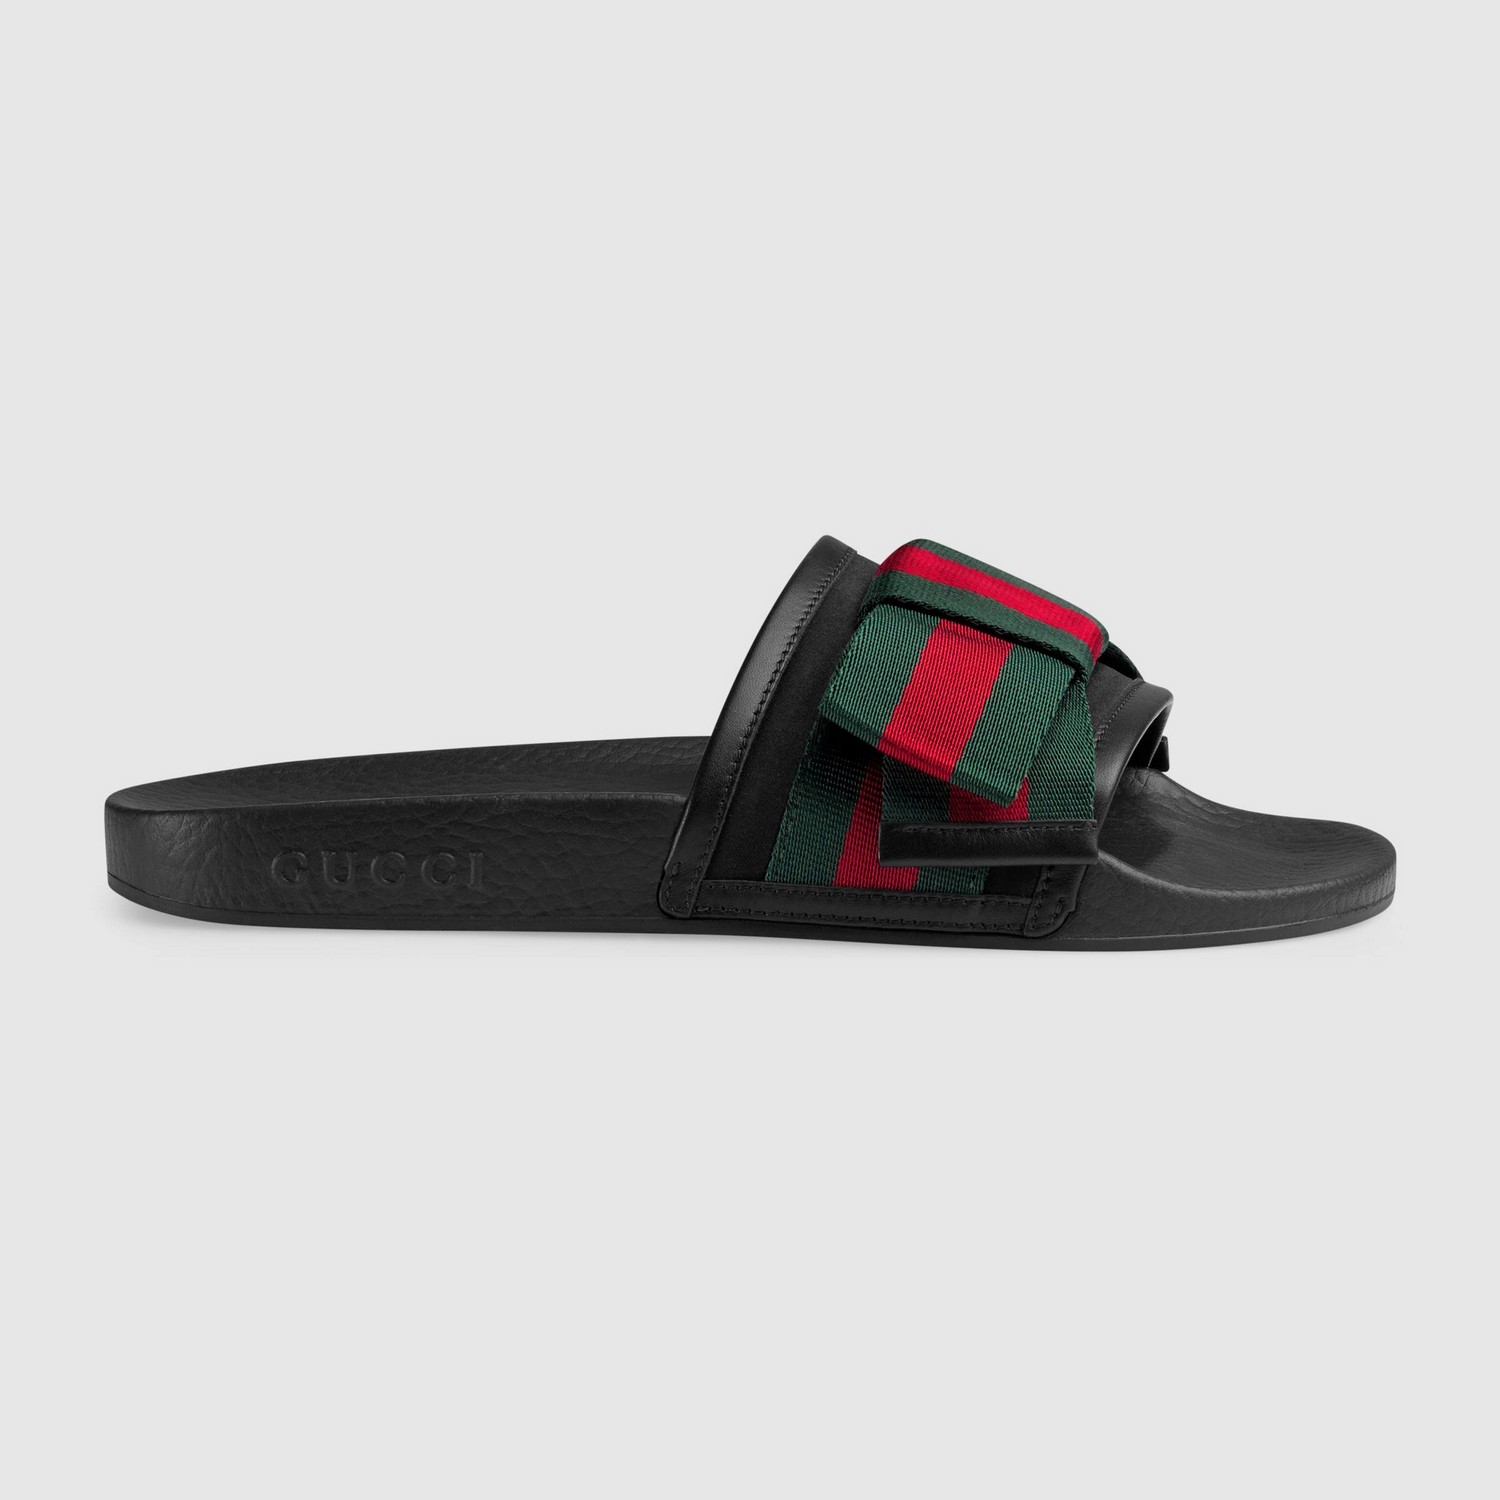 gucci flip flops with bow